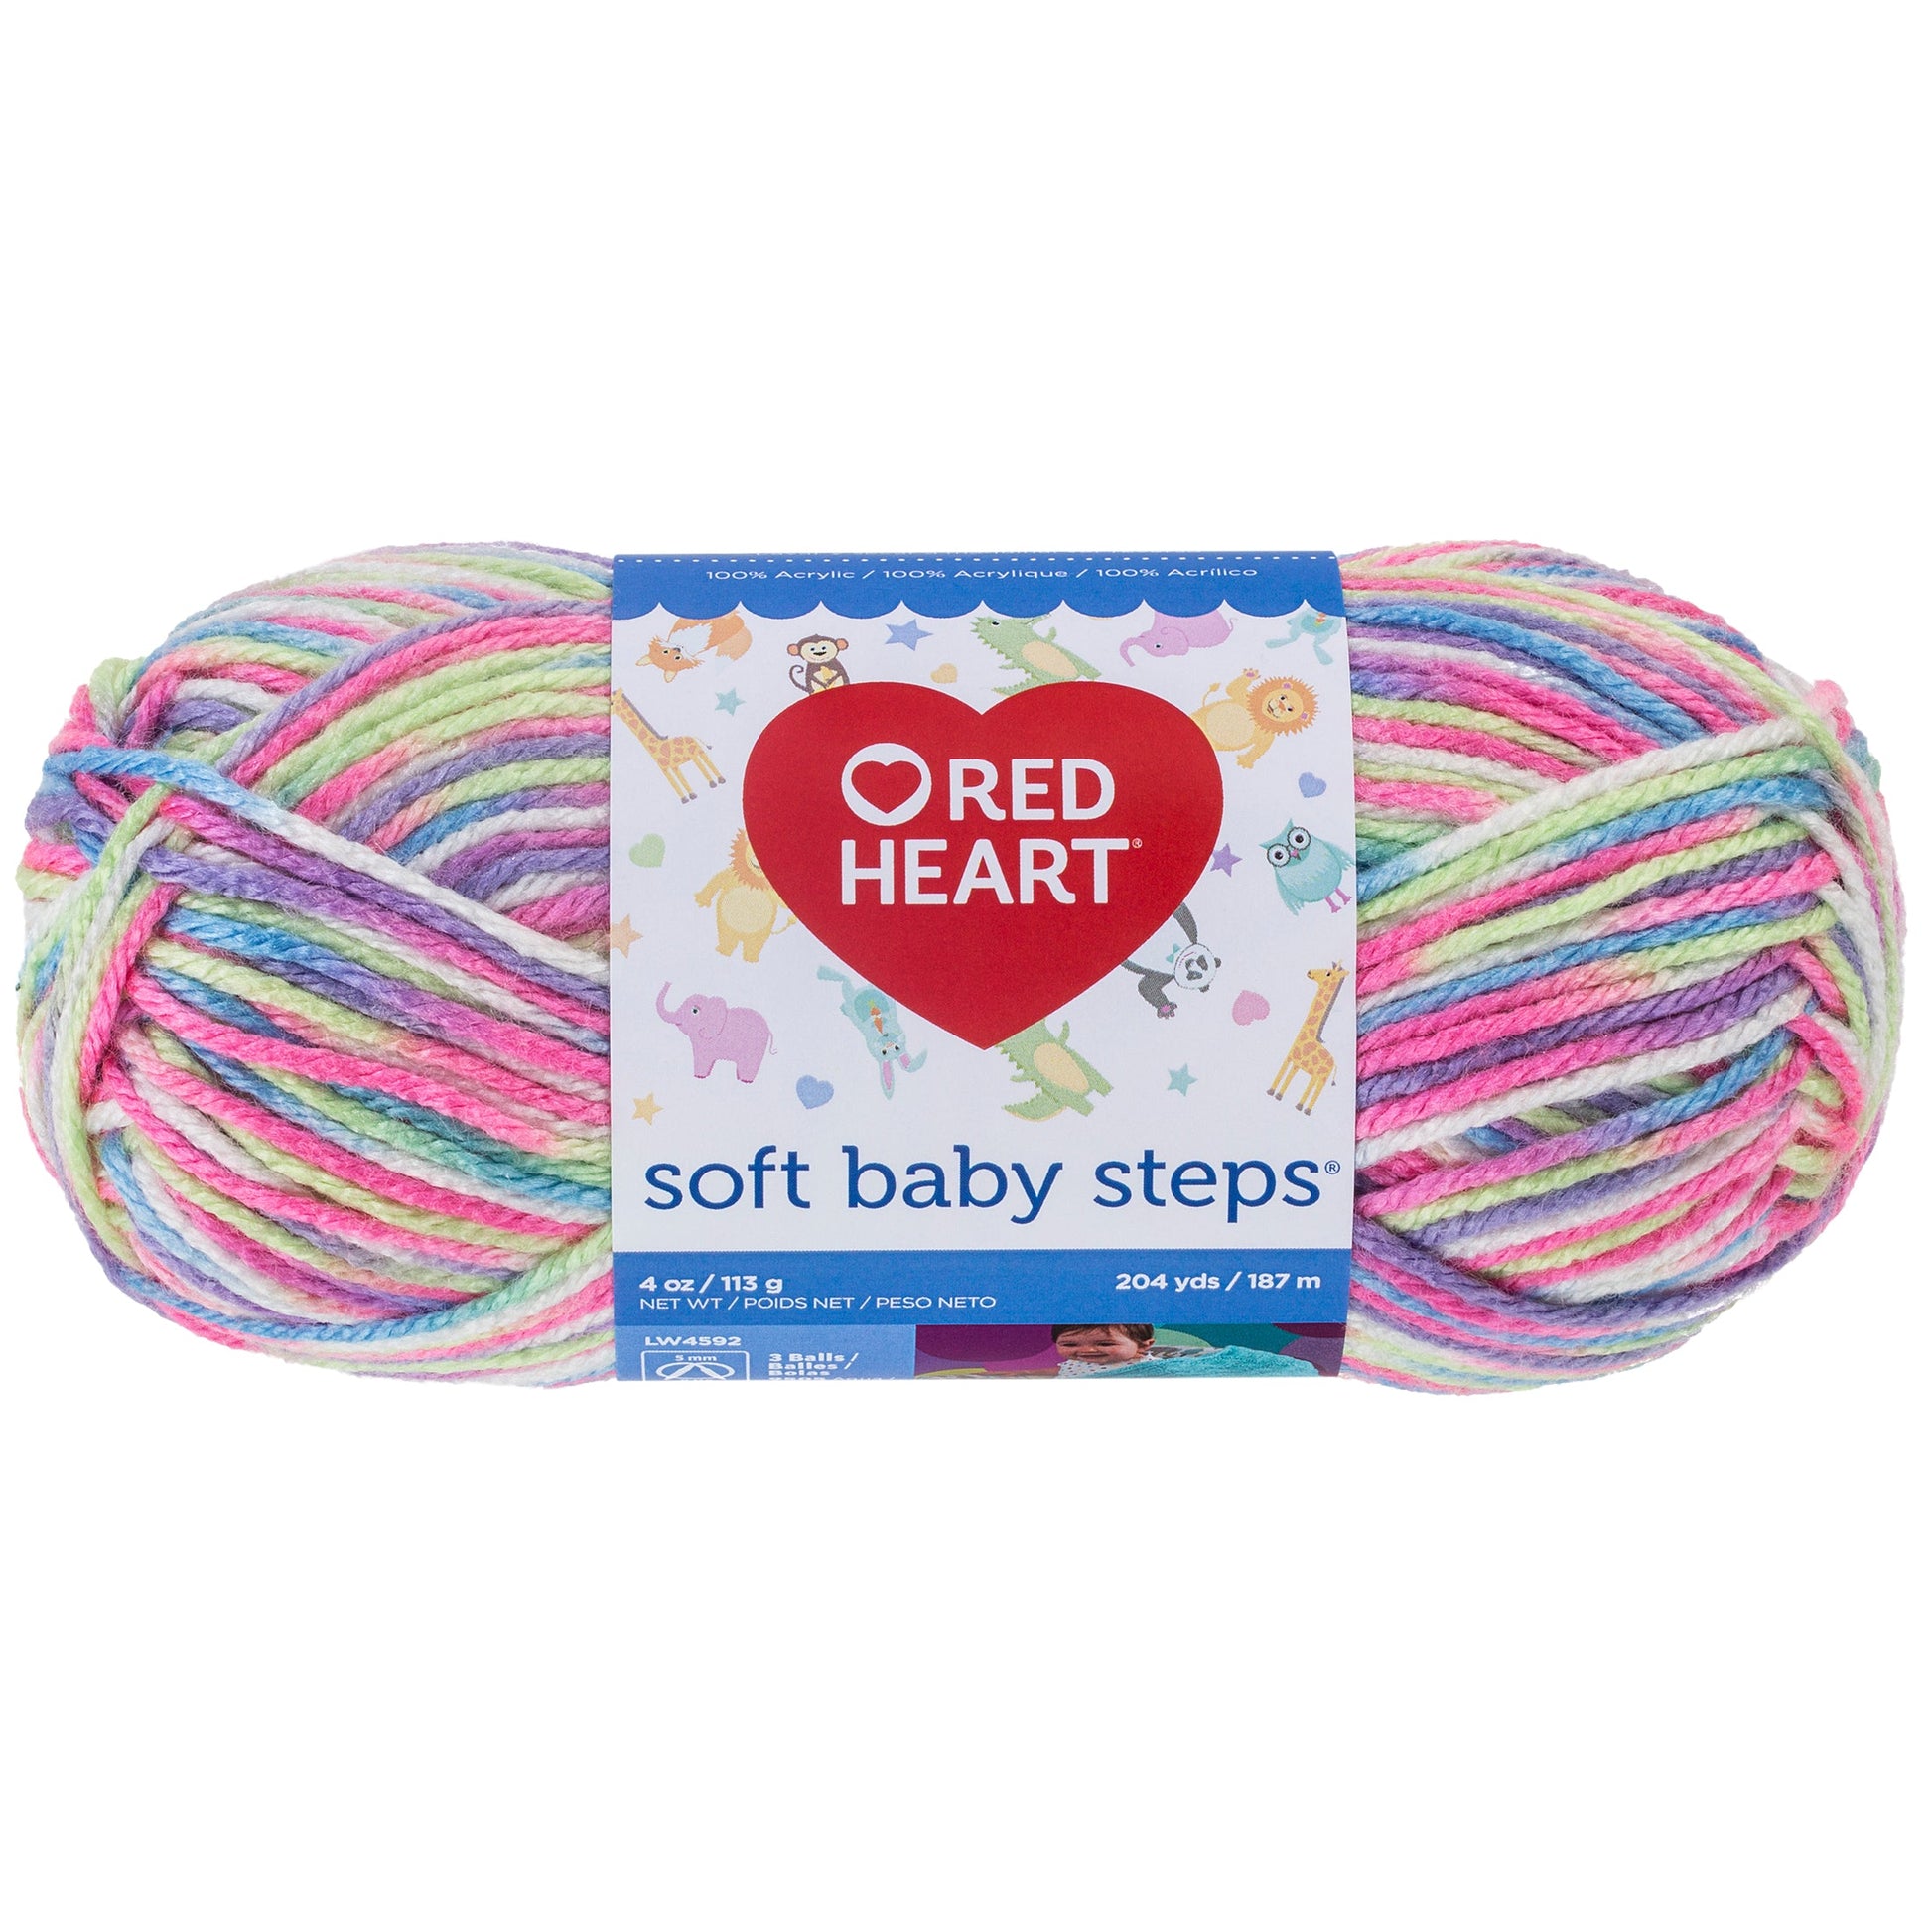 Red Heart Soft Baby Steps Yarn - Discontinued Shades